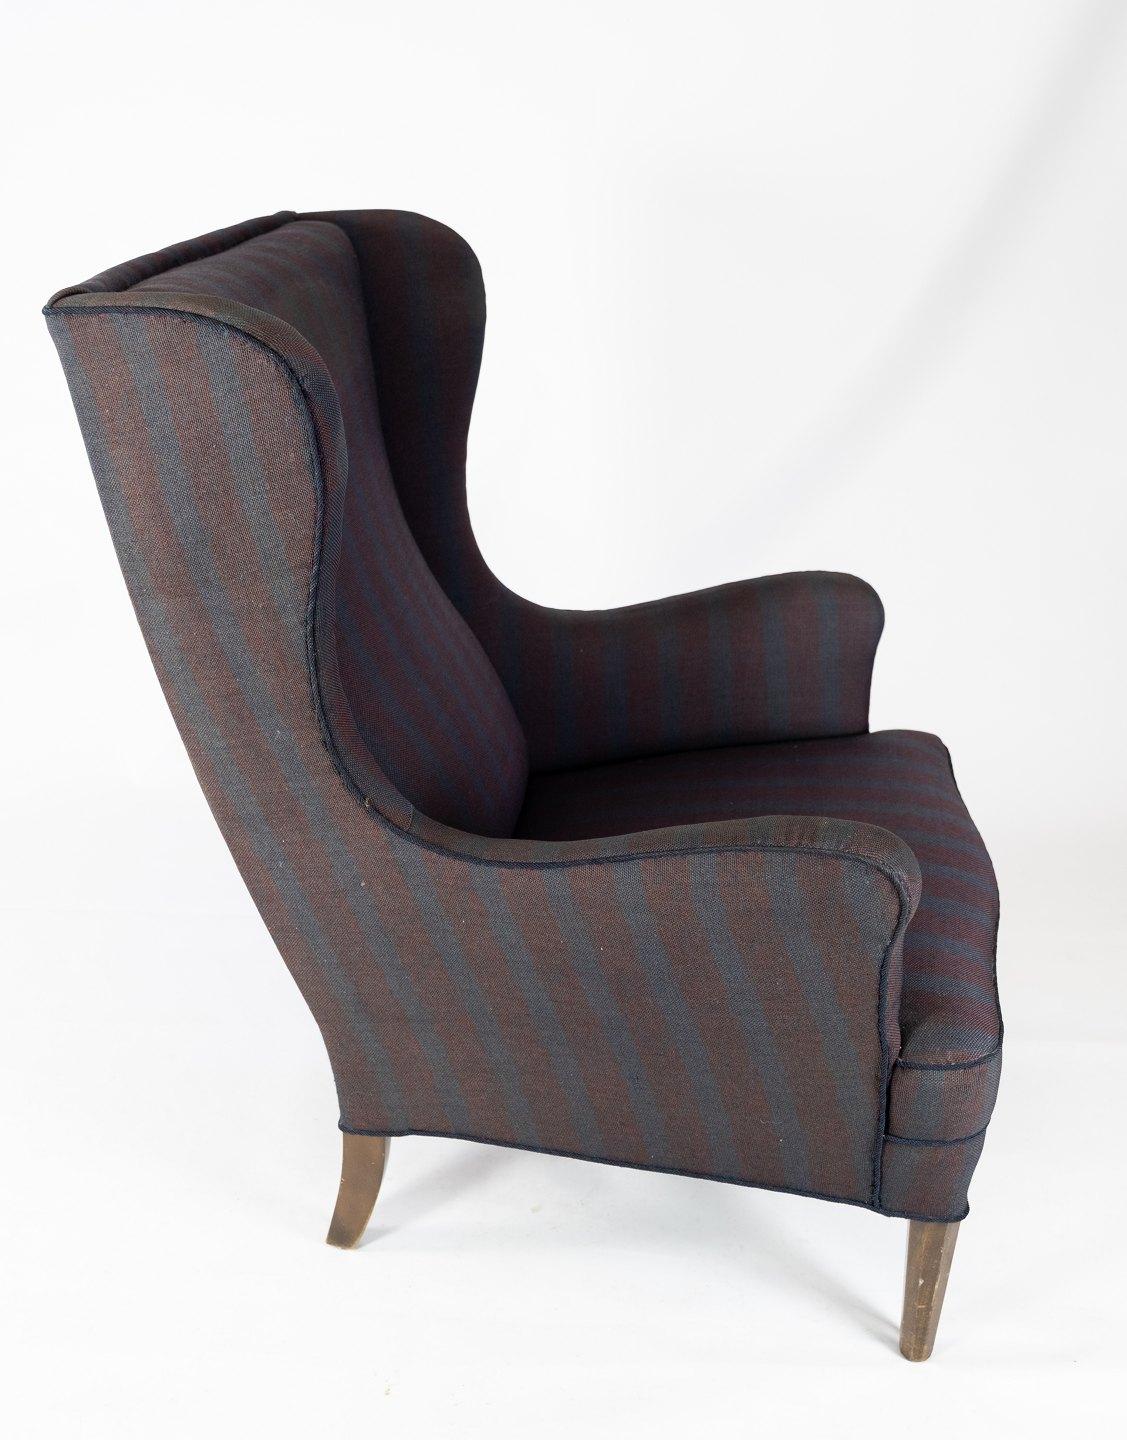 Mid-20th Century Tall Easy Chair with Dark Striped Fabric, in Great Vintage Condition For Sale